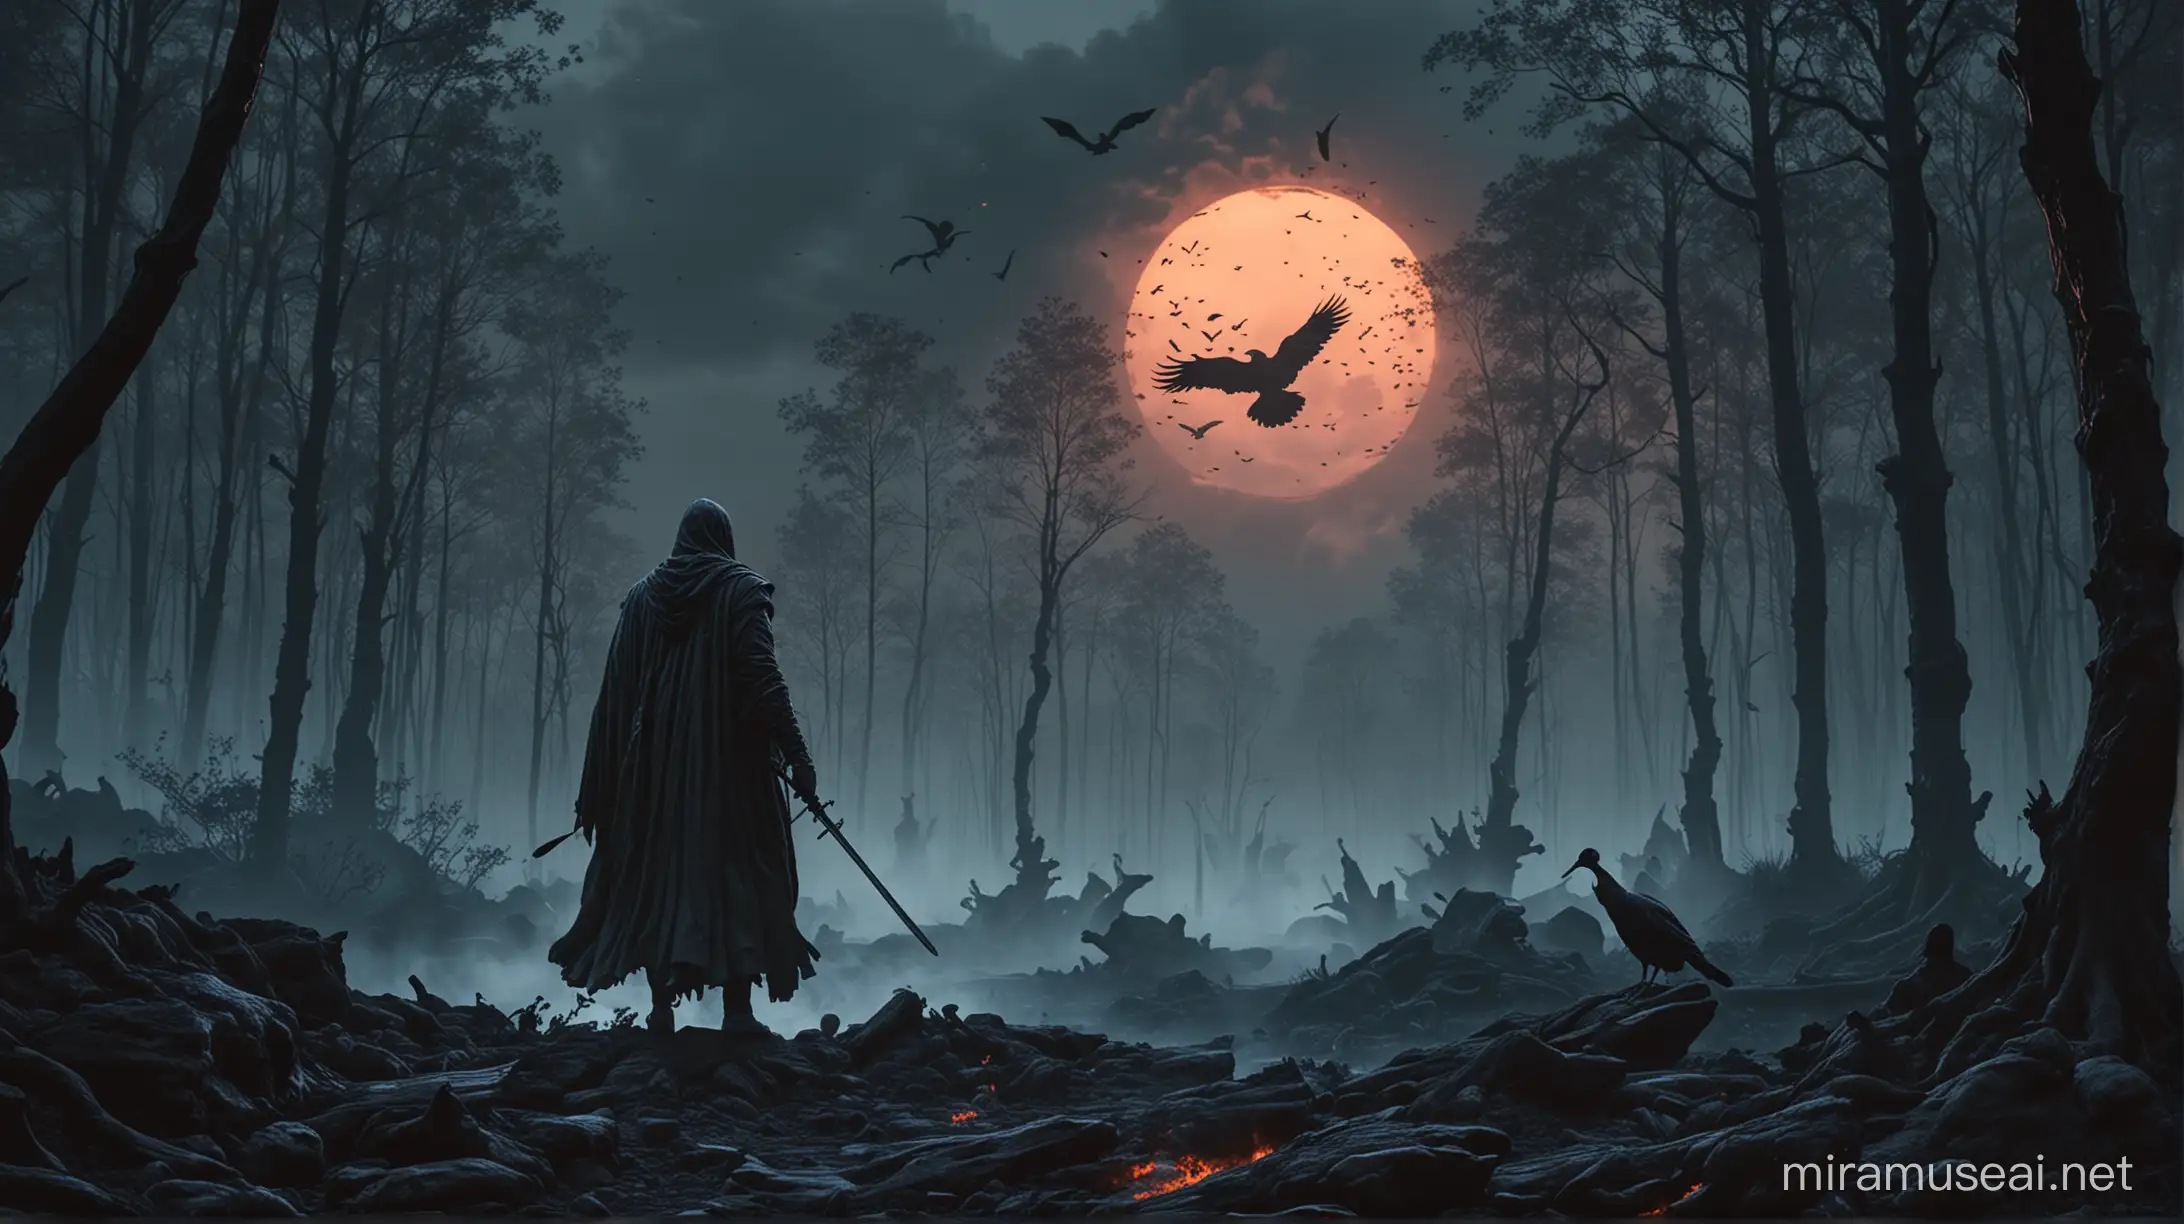 Stoicism, motivation, stoic muscular statues, dark sunset,
dark atmosphere
behind him a texture of black smoke will appear and the character is walking through the forest where on the sides there is blue lava from the sky comets are falling and ravens are flying the character has a black robe and a sword on his back the character is shown from the front